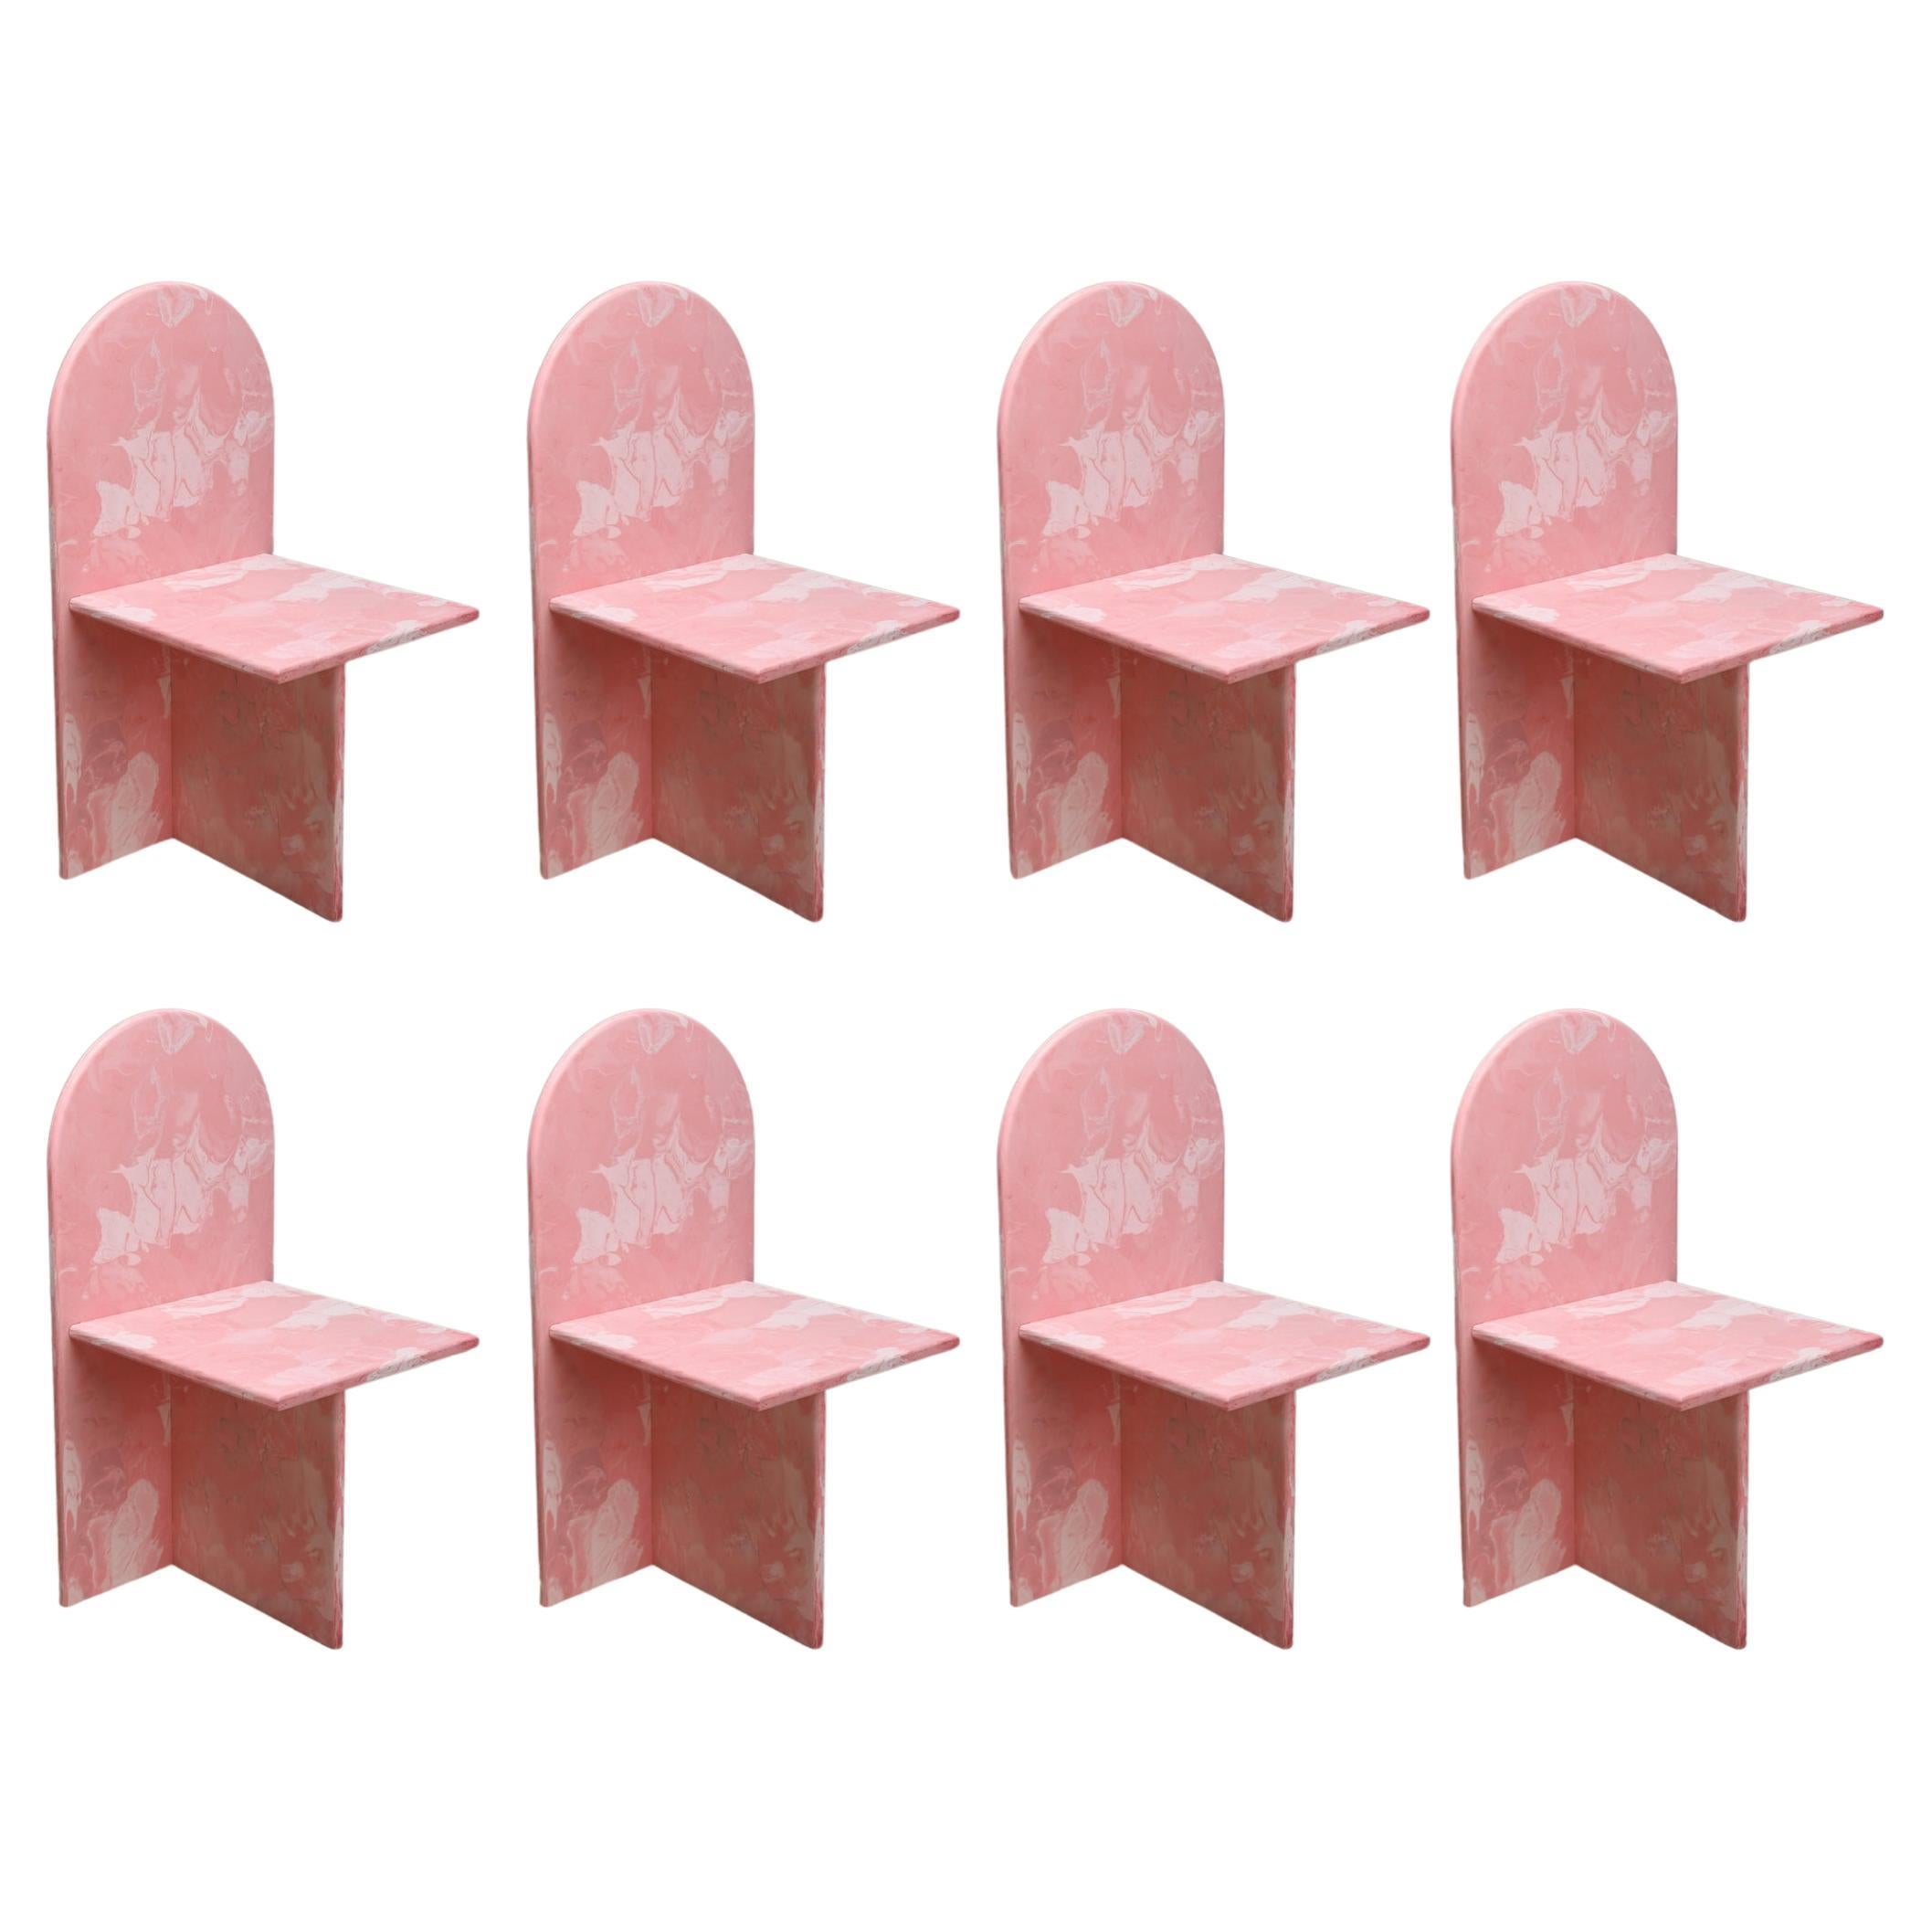 8x Contemporary Chairs Pink 100% Recycled Plastic Hand-Crafted by Anqa Studios